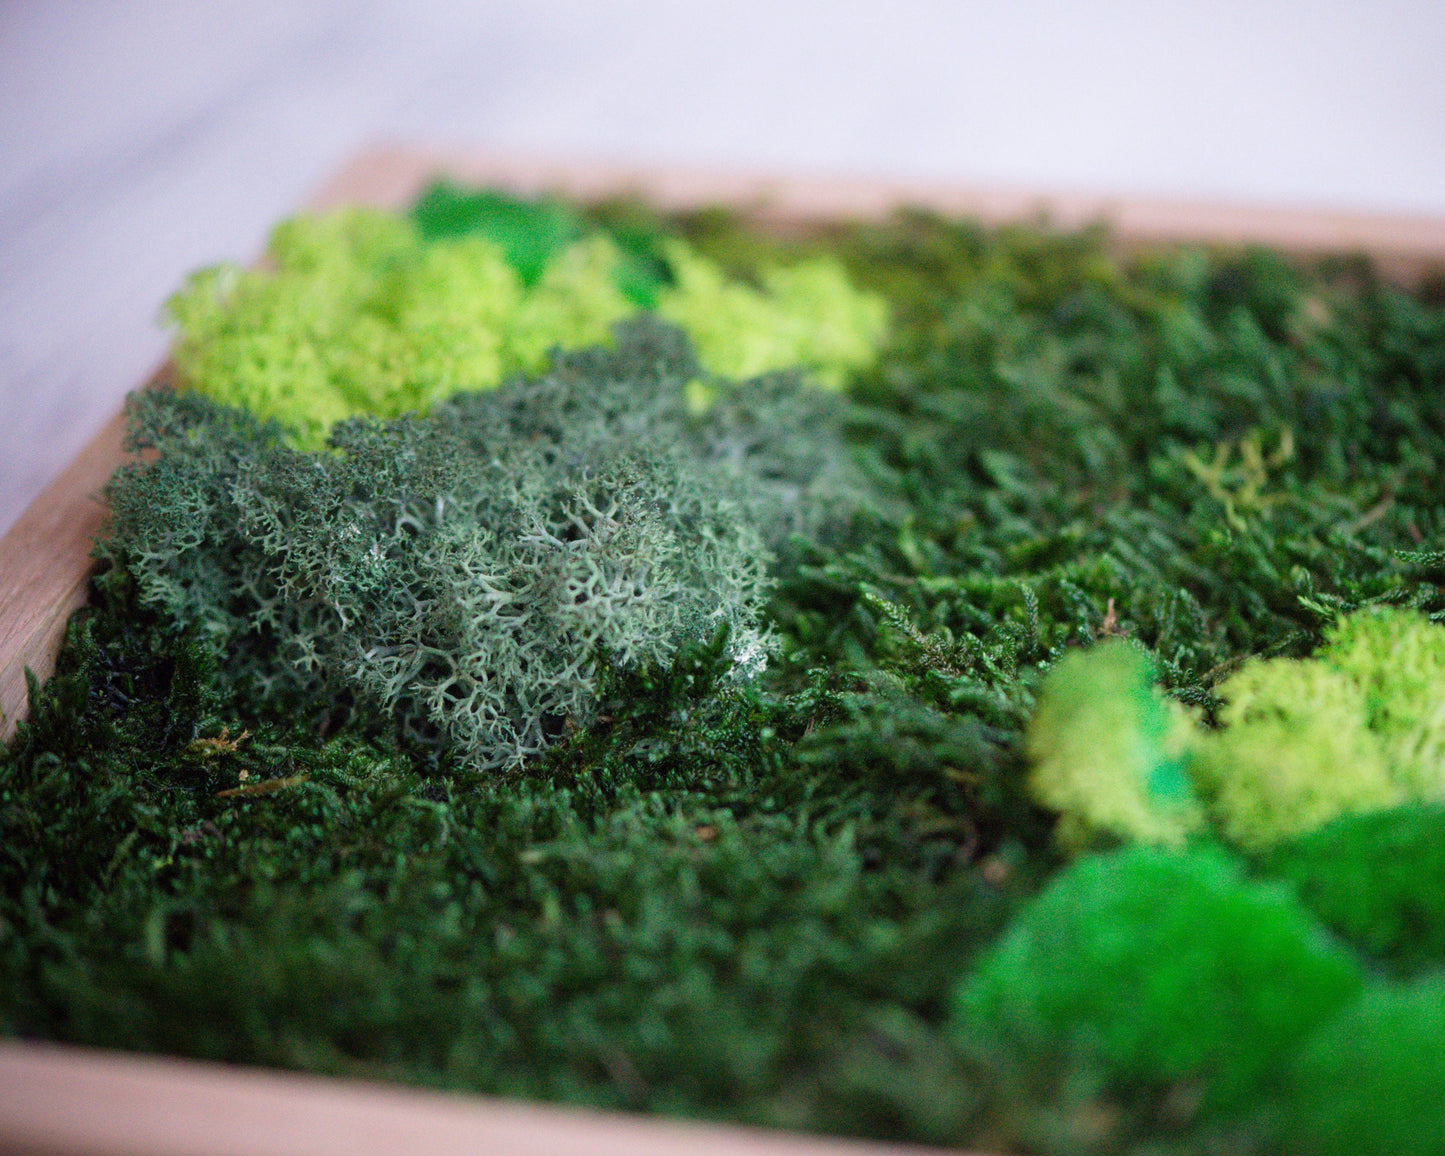 Experience the Magic of Nature with Our Eco-Friendly Reindeer Moss Wall Art Set of 3